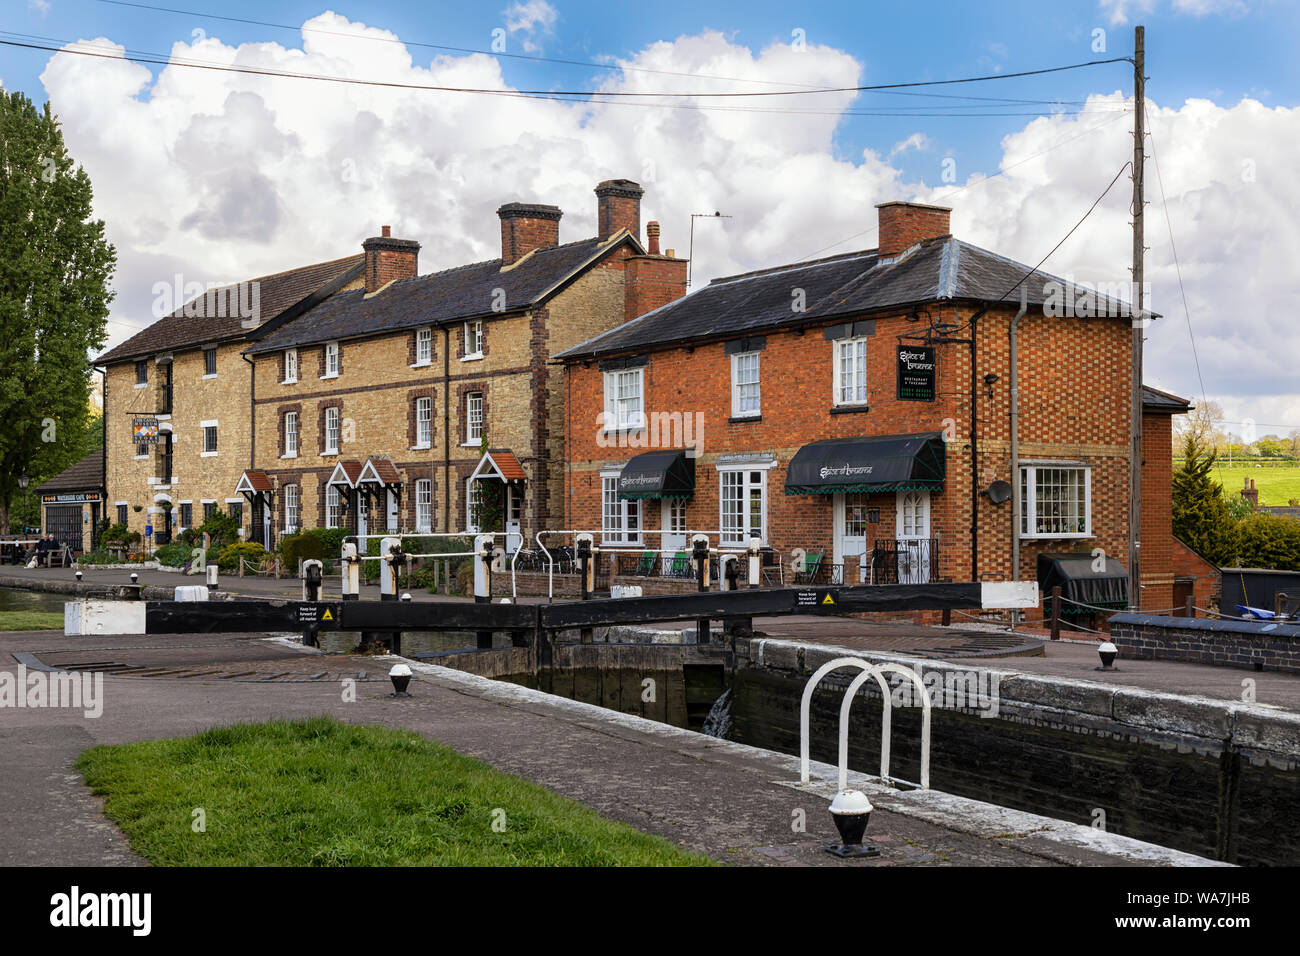 STOKE BRUERNE, NORTHAMPTONSHIRE, UK - MAY 10, 2019:  Pretty canalside cottages seen above lock on the Grand Union Canal Stock Photo